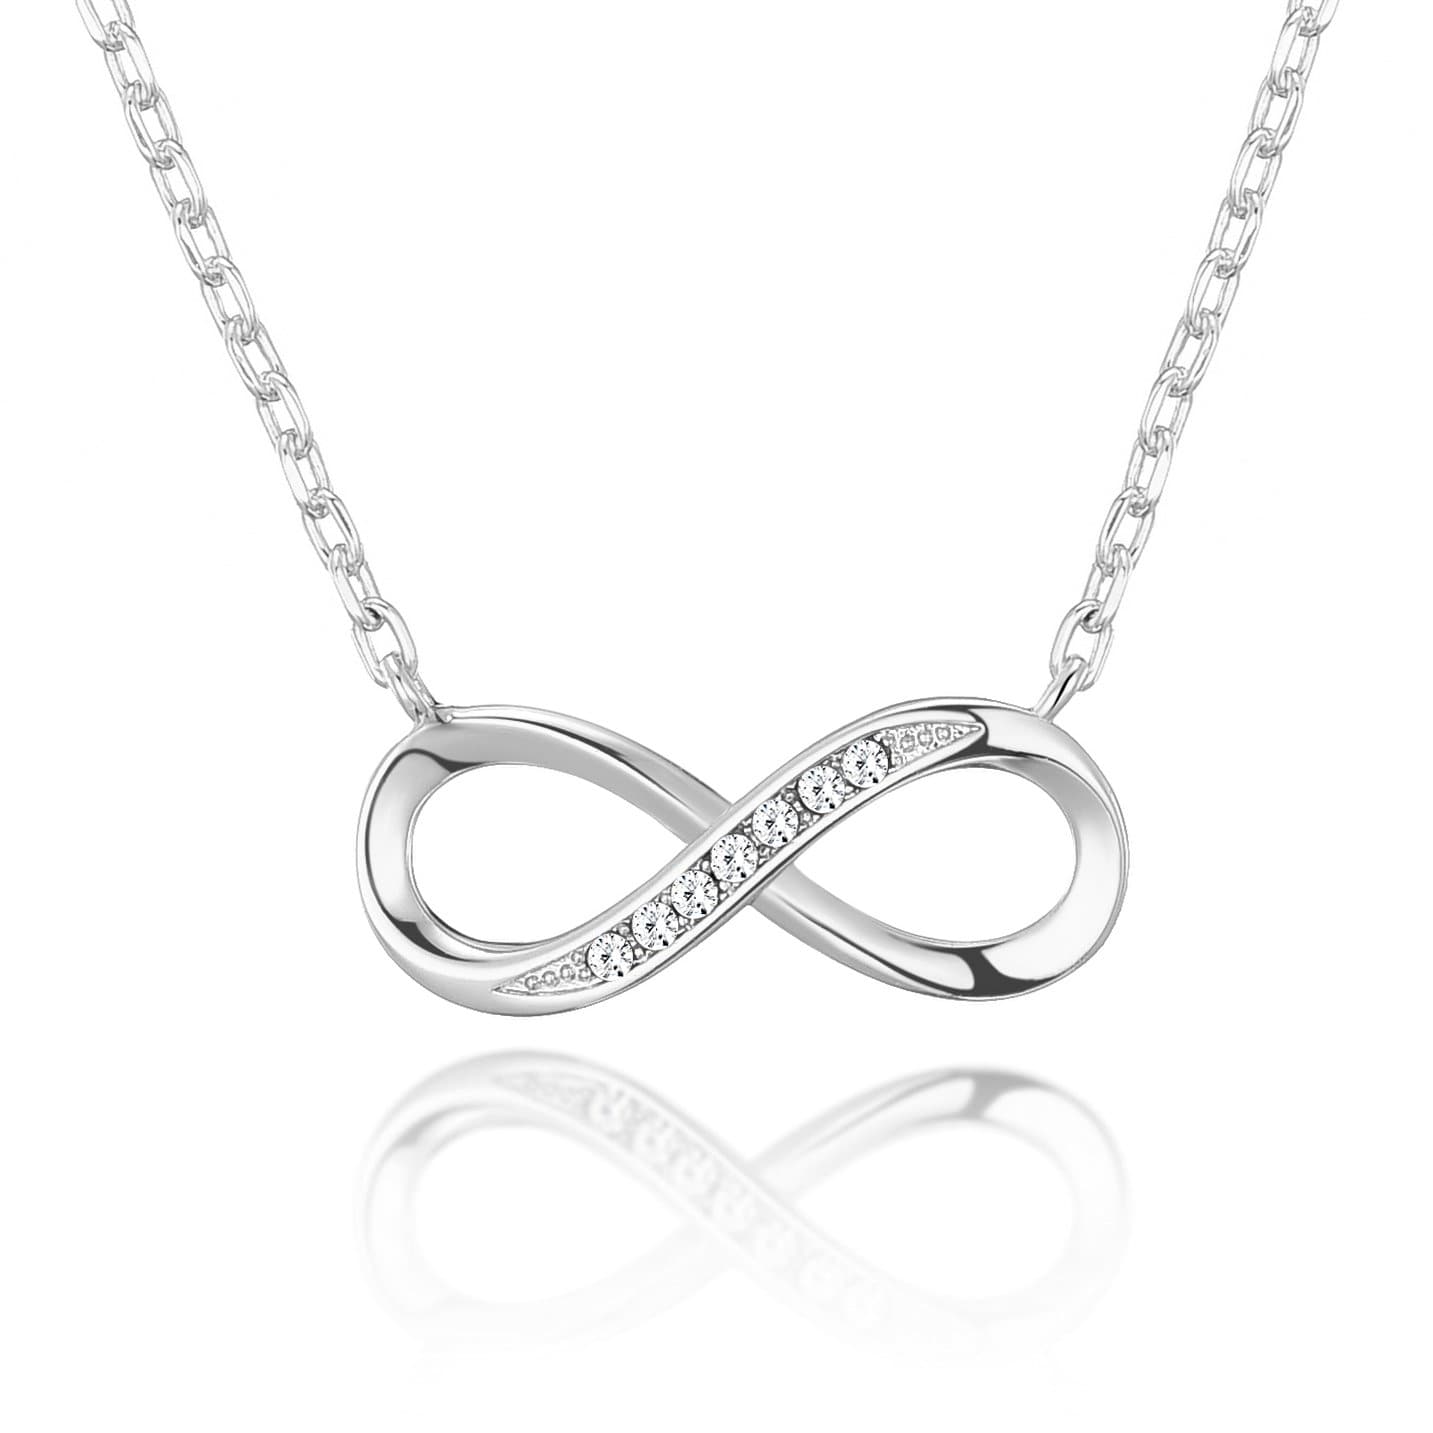 Silver Plated Infinity Pendant Necklace Created with Zircondia® Crystals by Philip Jones Jewellery